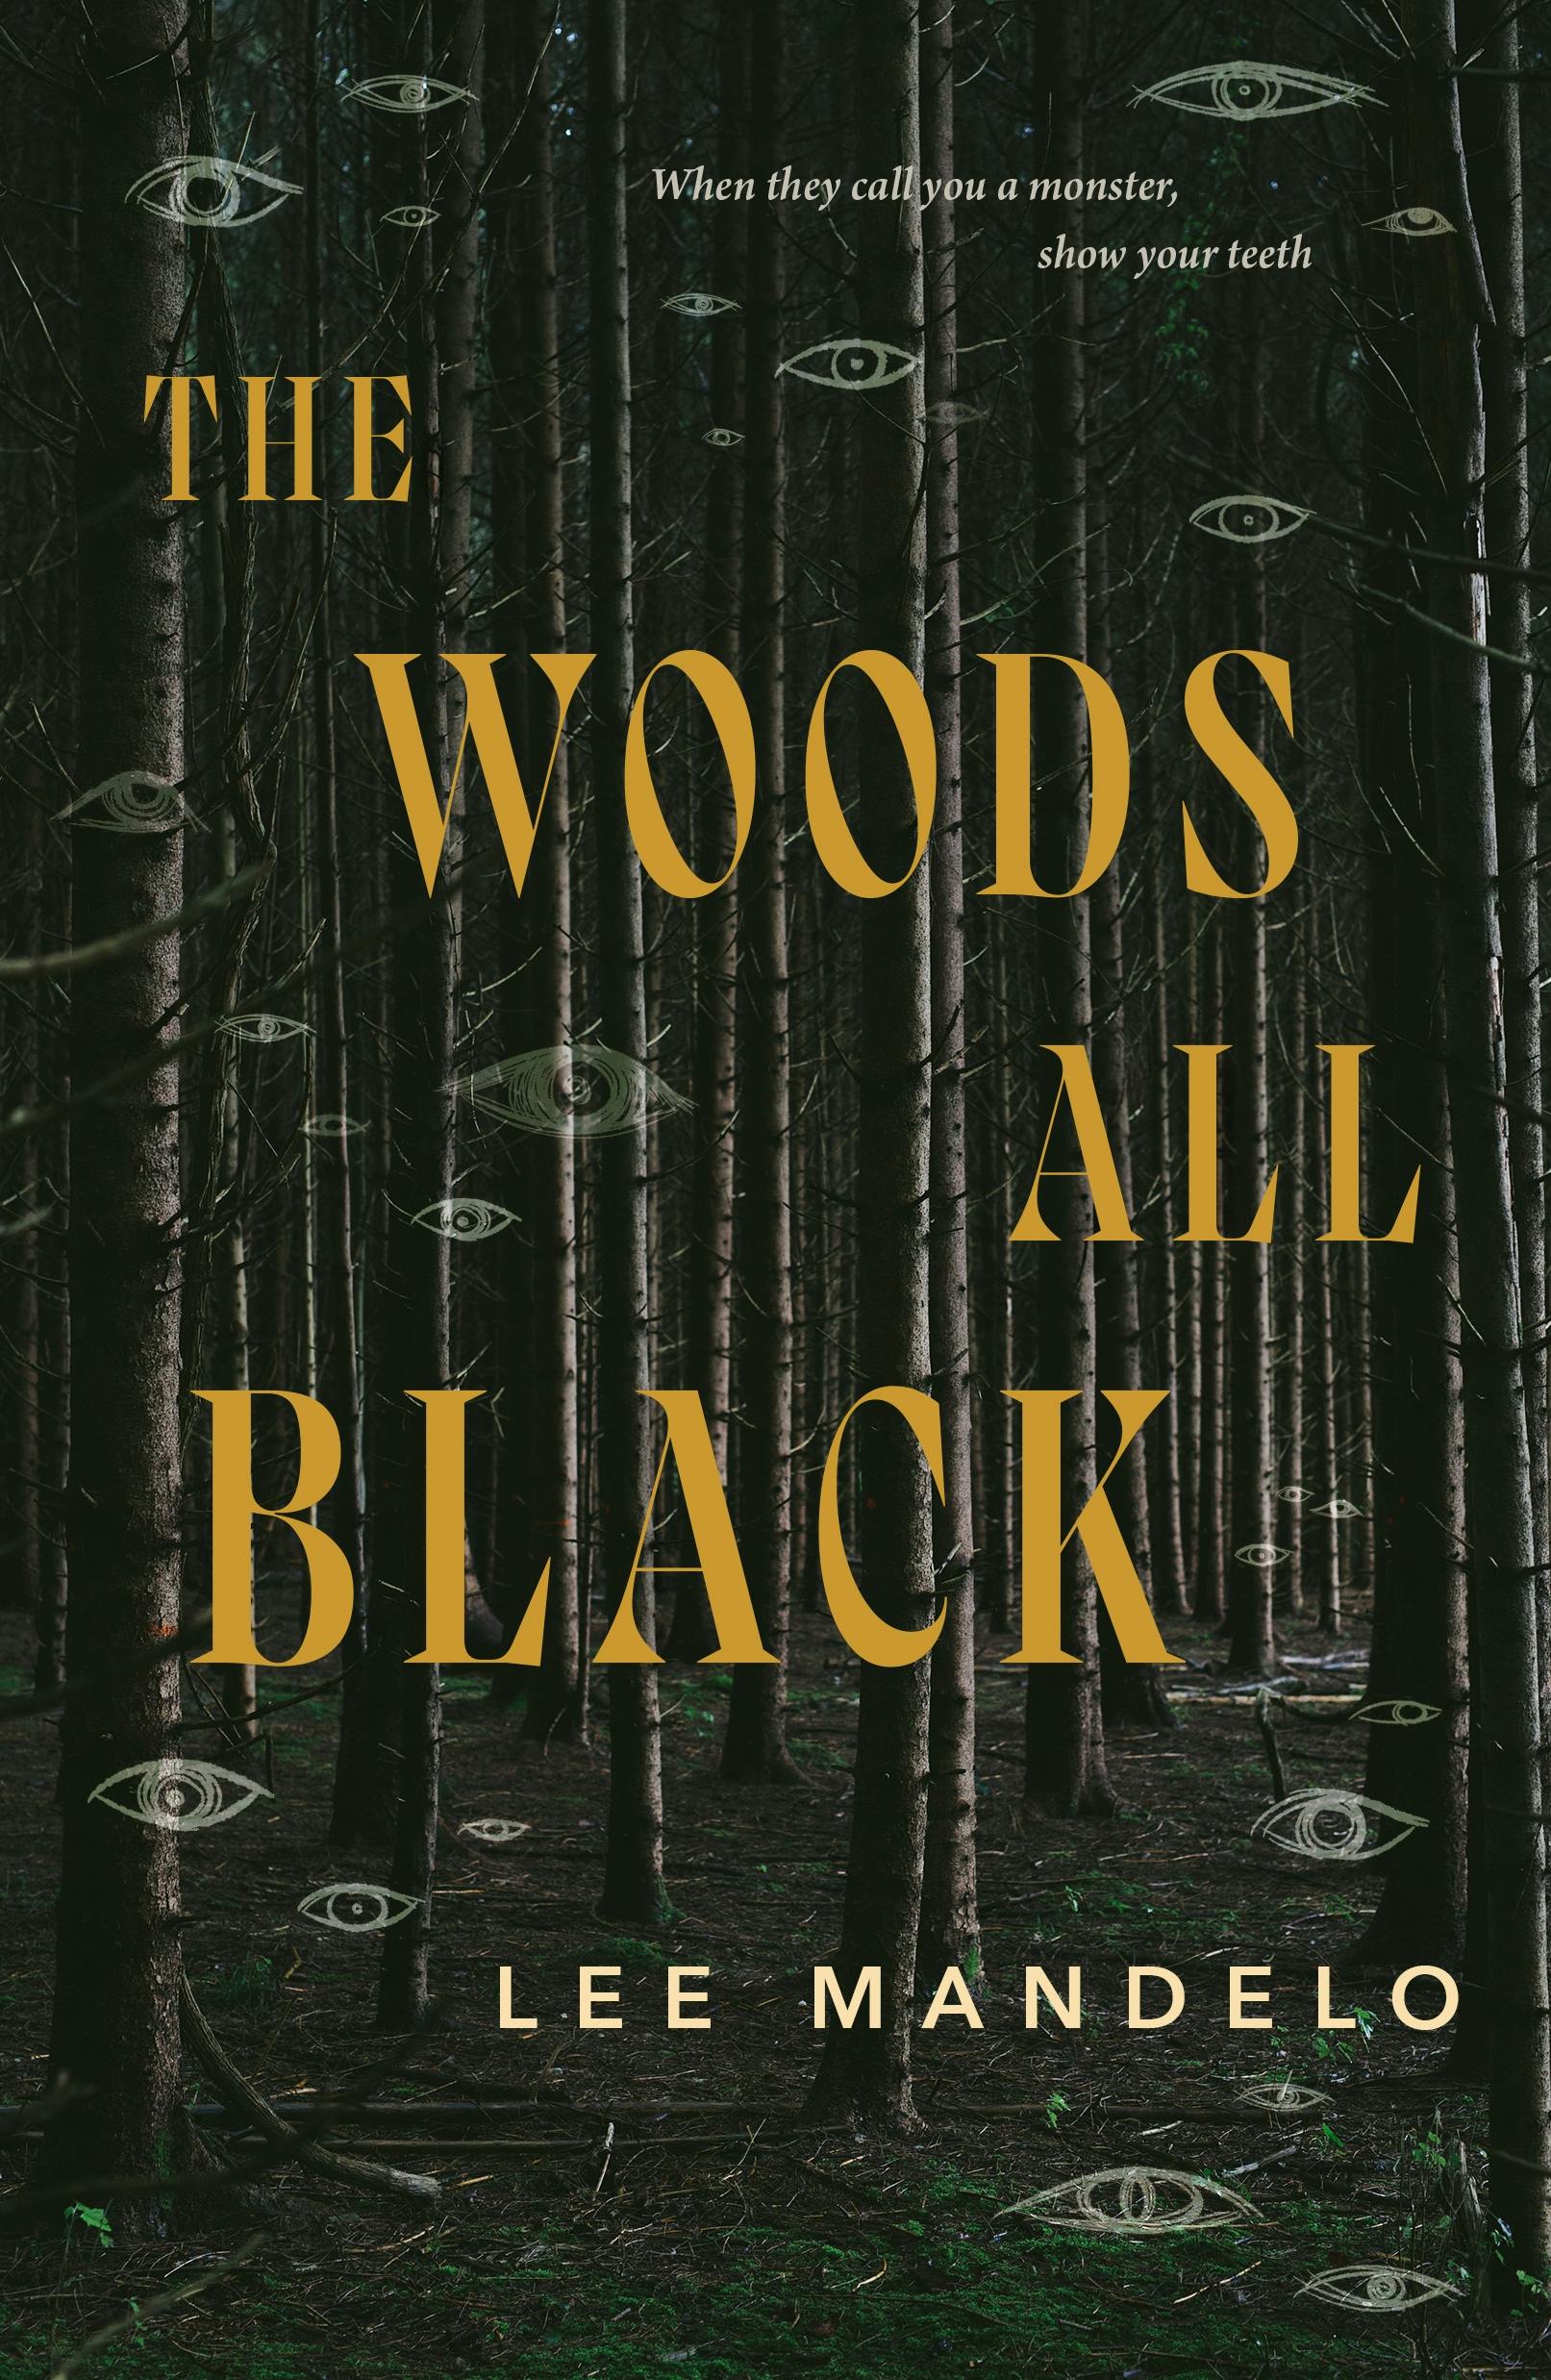 Cover for the book titled as: The Woods All Black